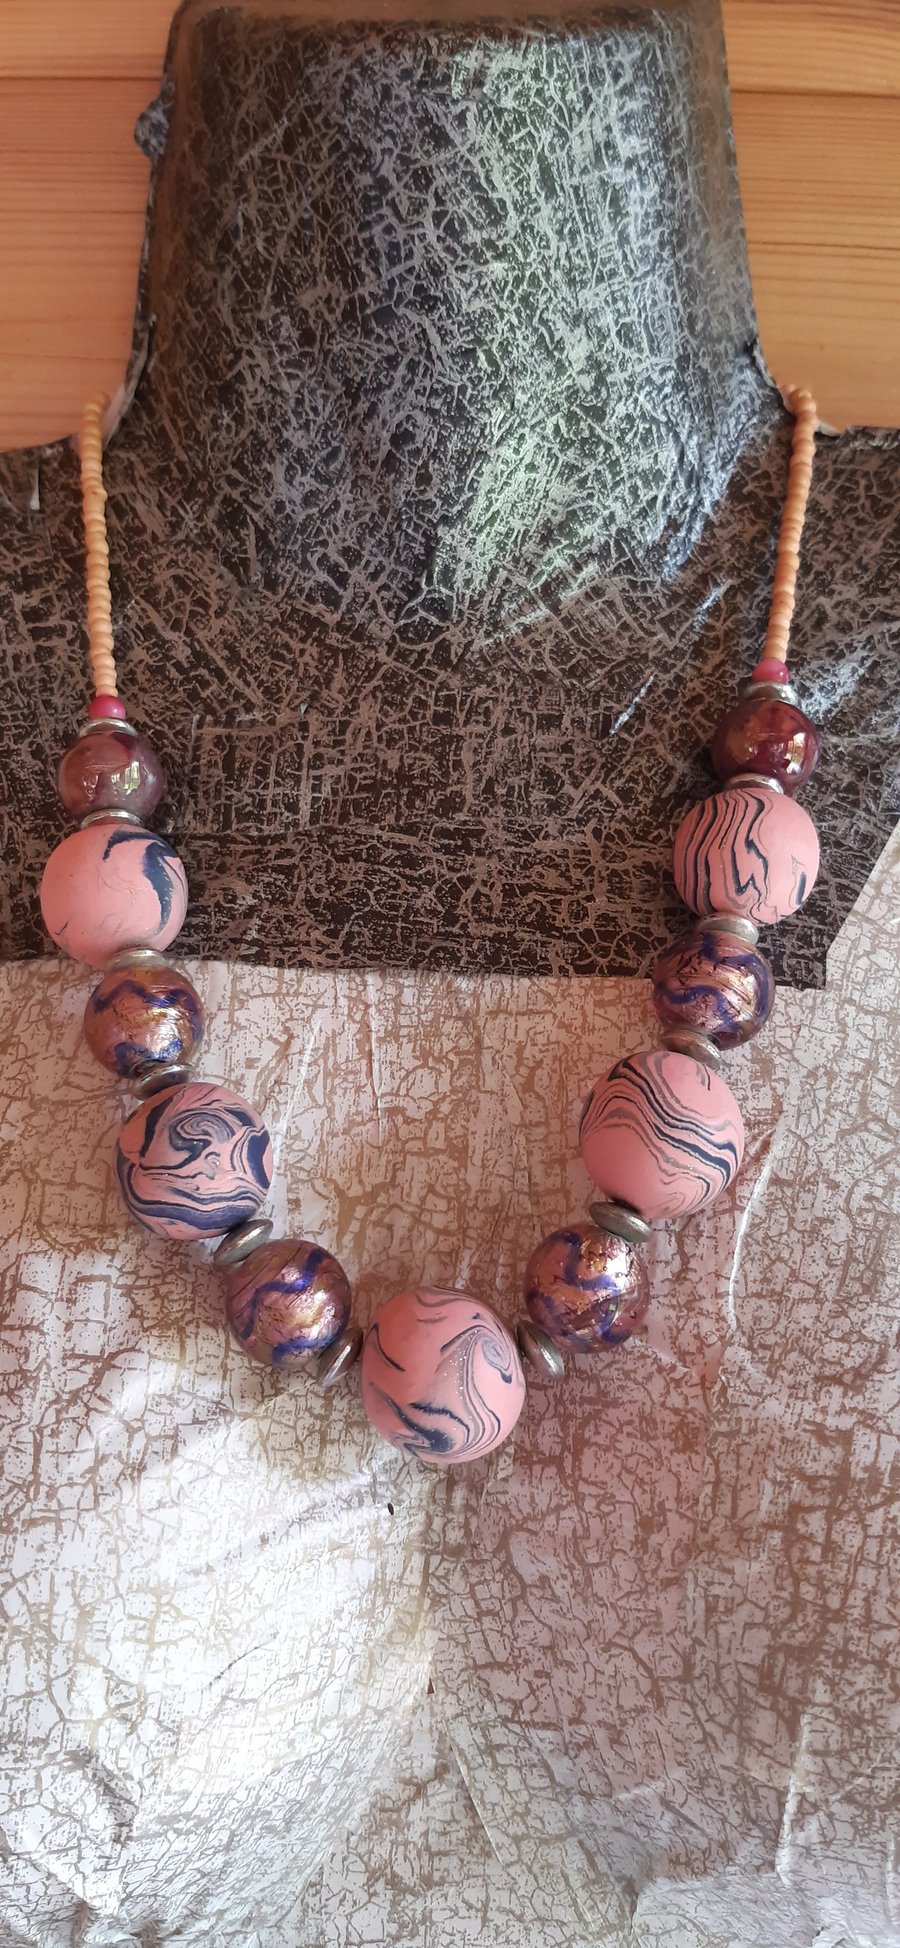 Statement polymer clay necklace in pinks and blue